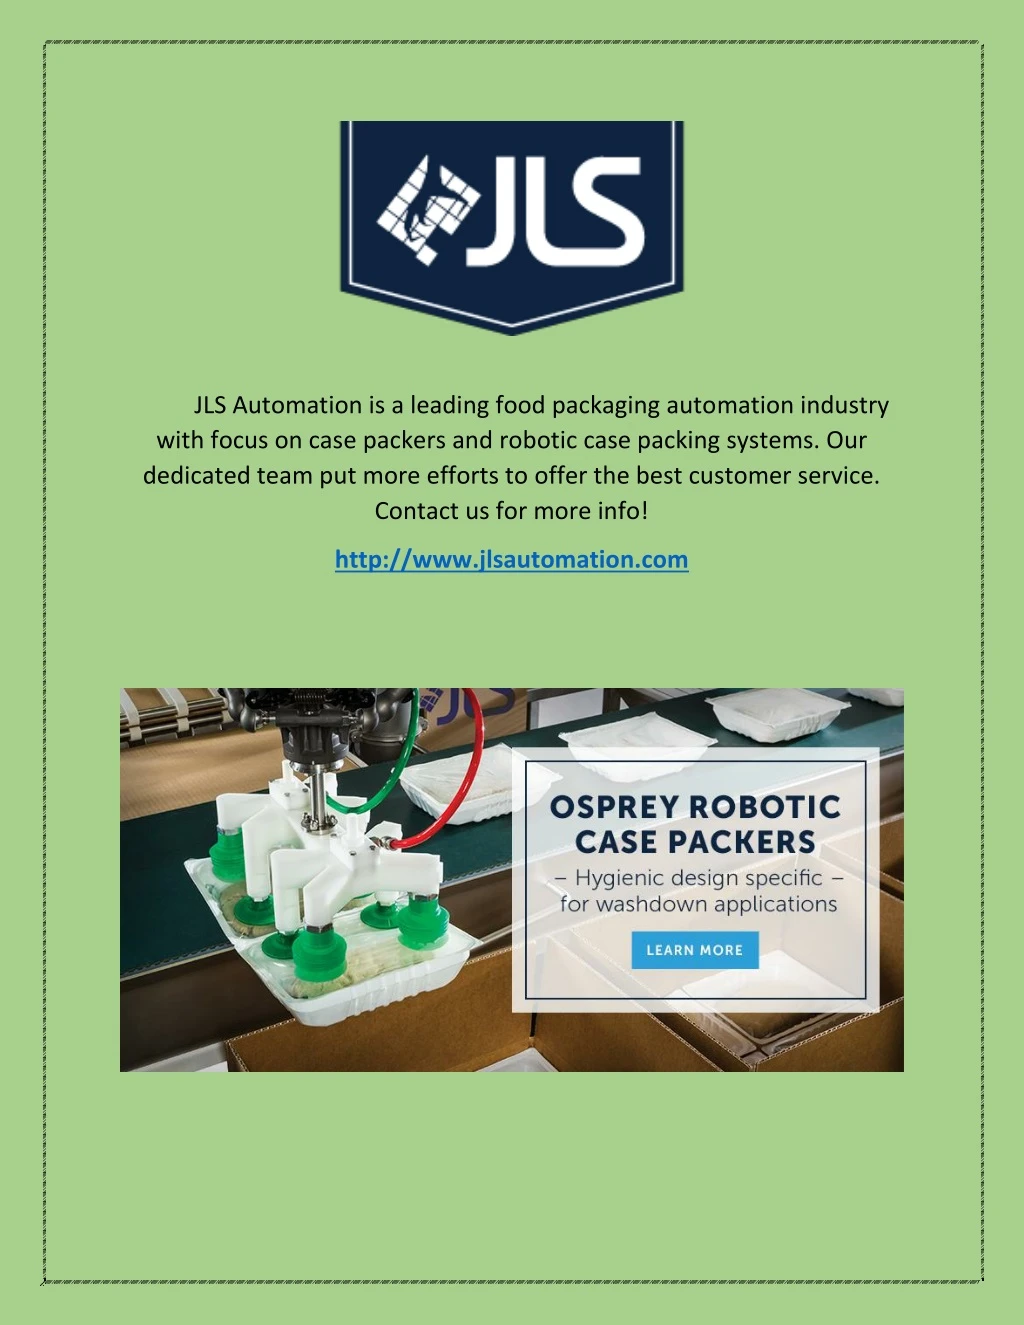 jls automation is a leading food packaging